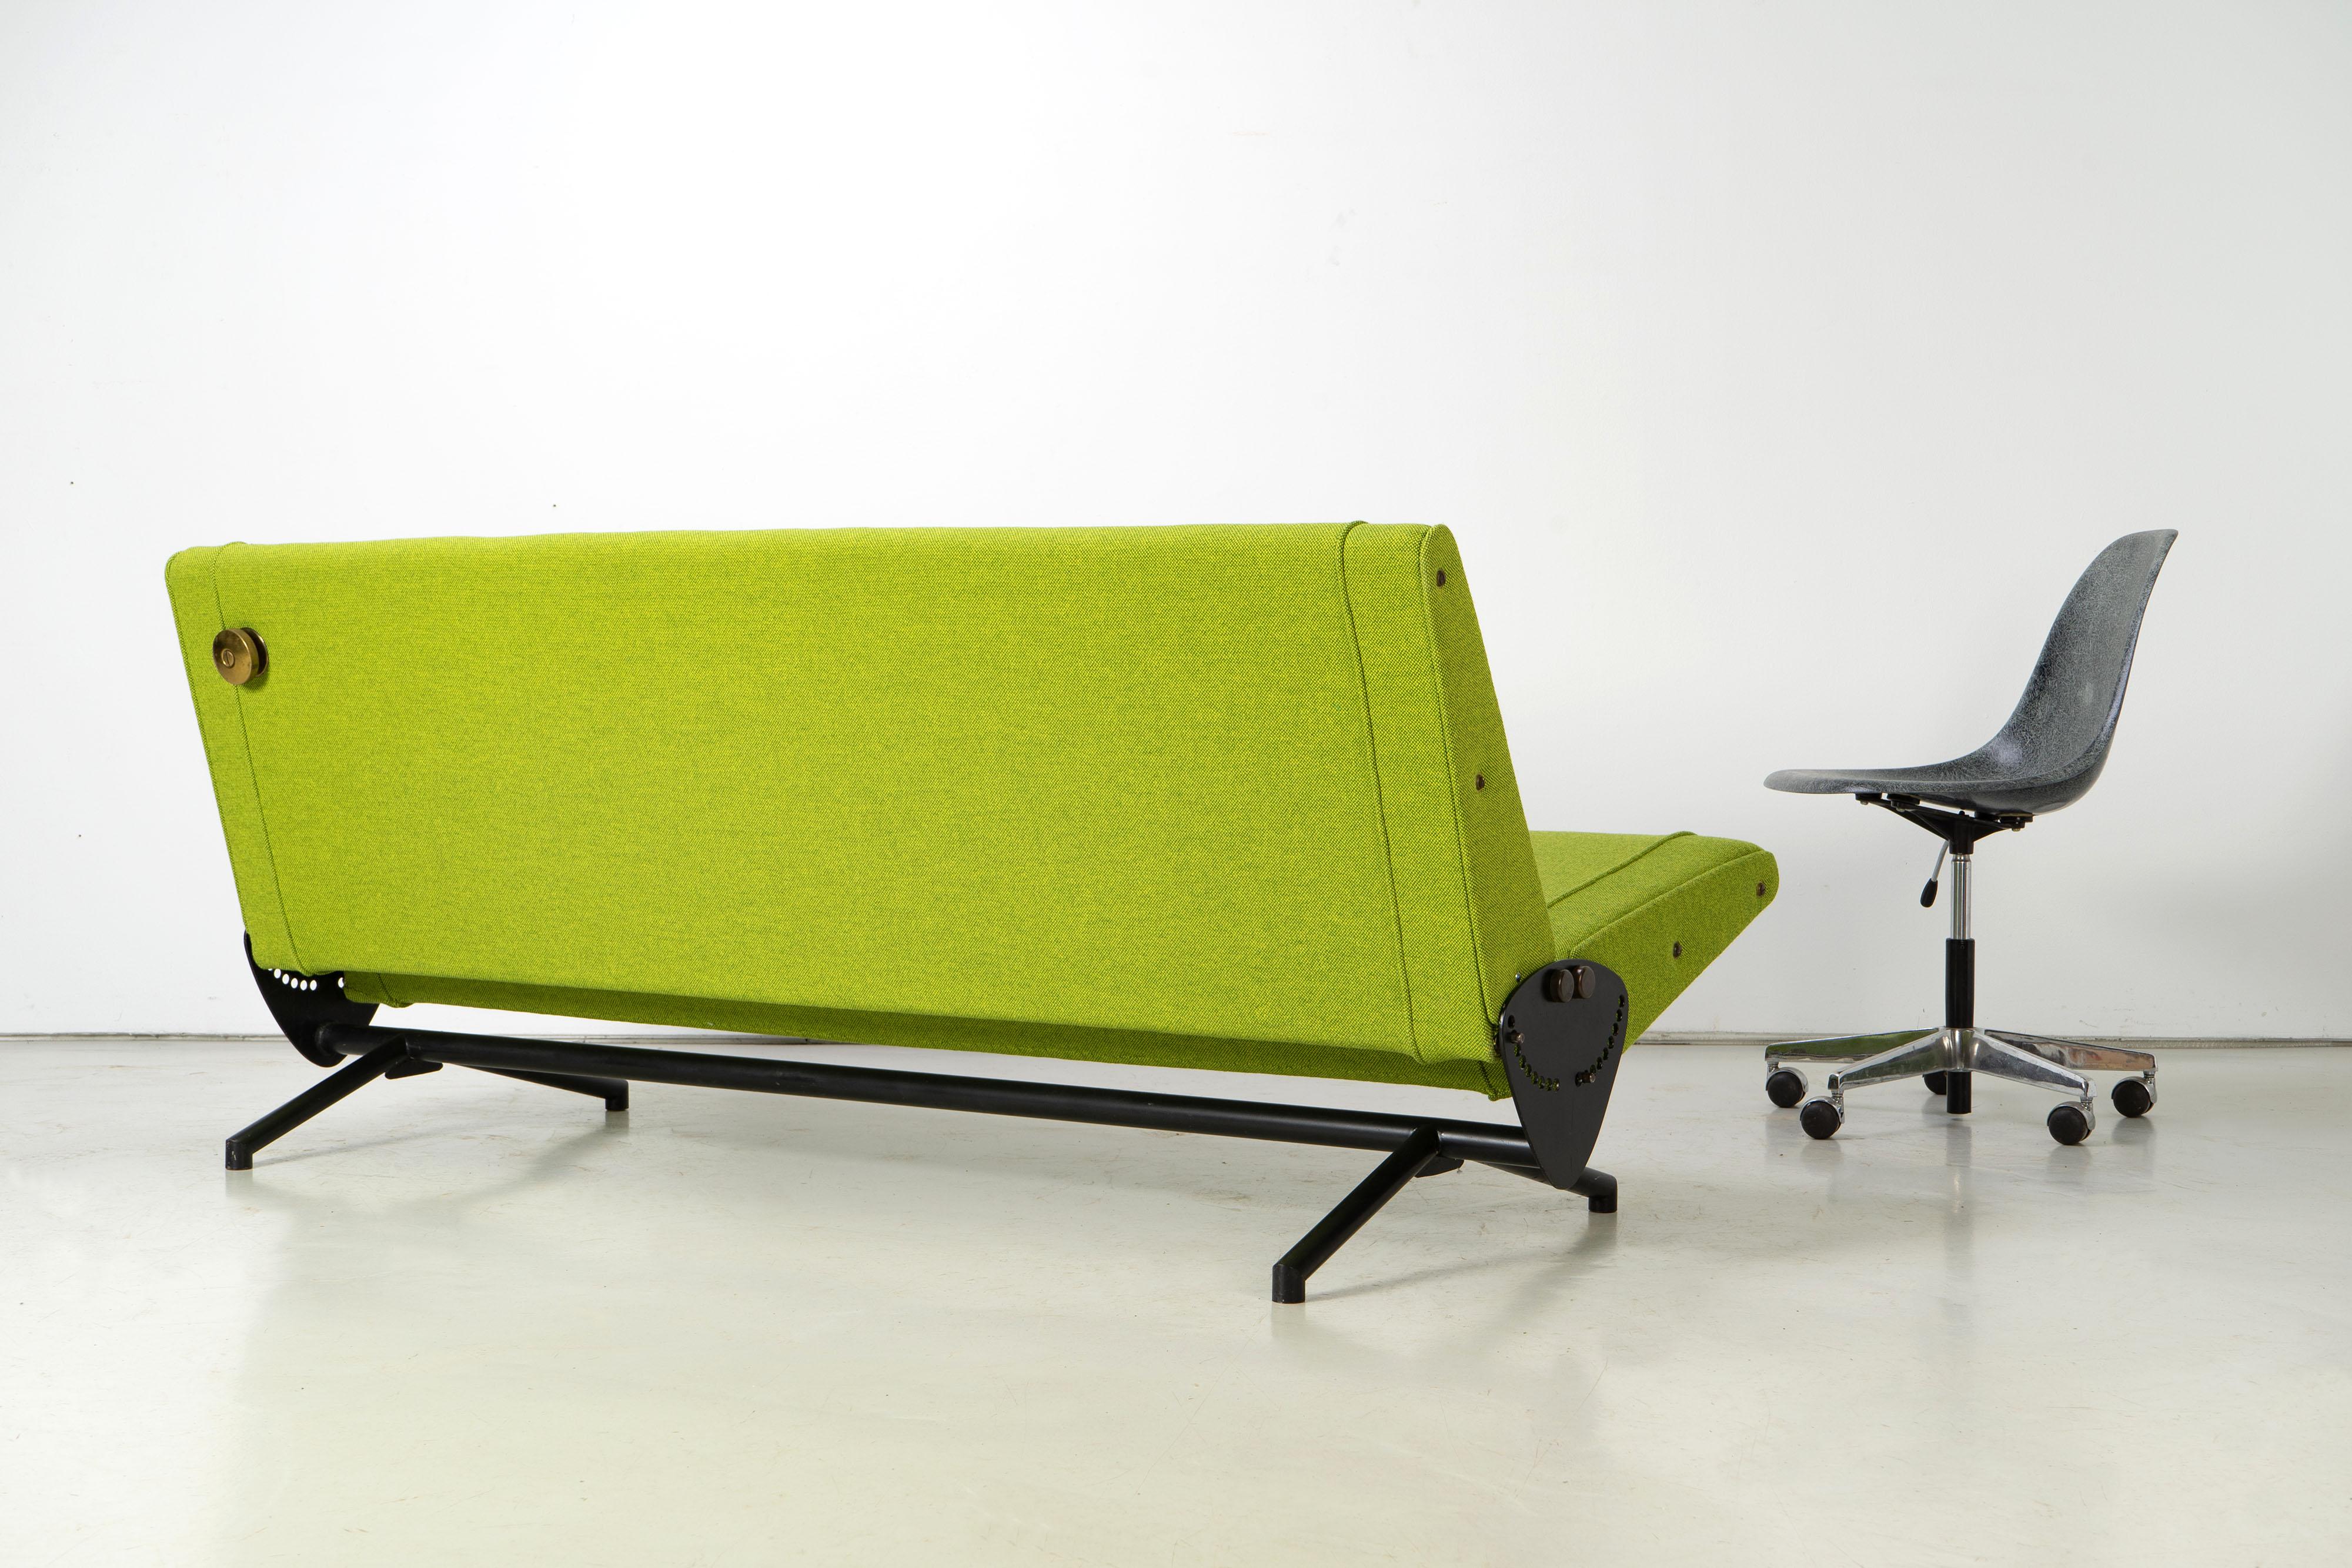 Tecno D70 sofa by Osvaldo Borsani, Italy 1954. Black lacquered steel frame with new wool upholstery (with Kvadrat fabric). The seat and backrest can be reclined in different positions with convenient and beautifully designed brass knobs, a patented